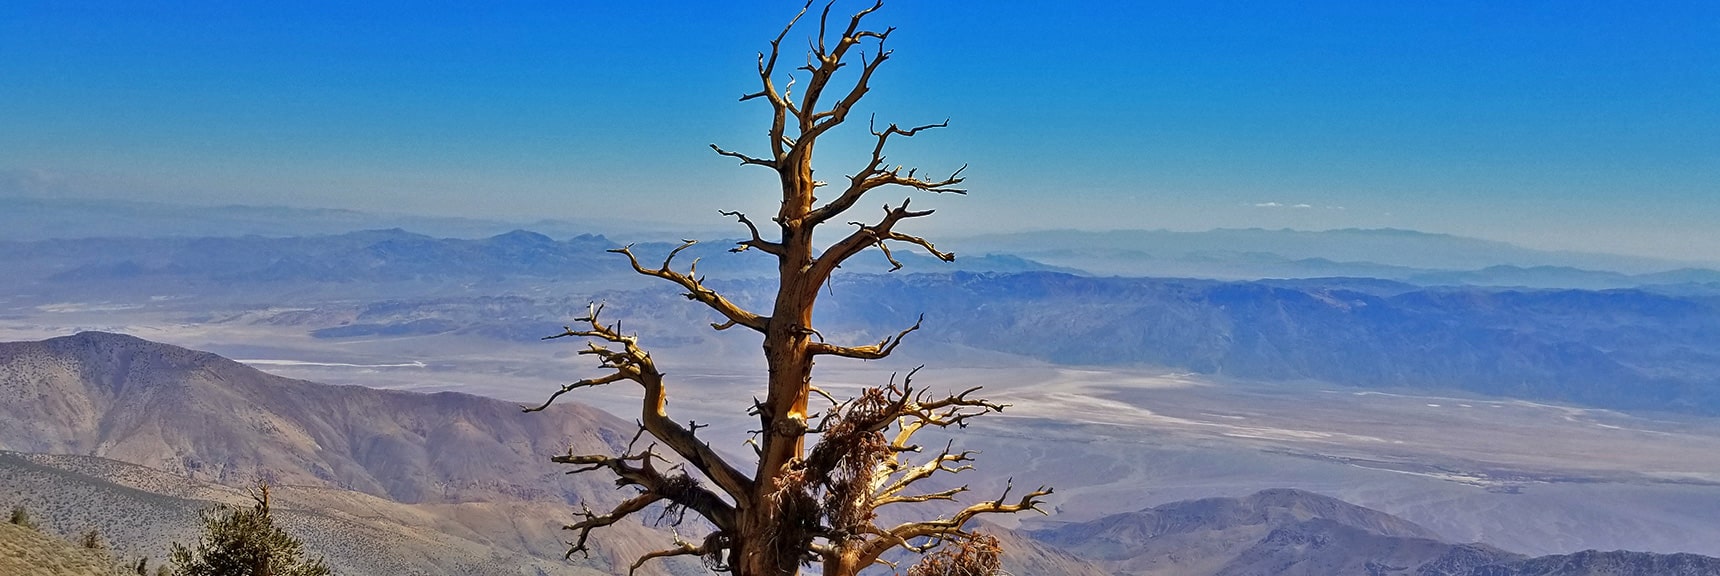 Another View Down to Death Valley Floor. Majestic Bristlecone Pine in Foreground | Telescope Peak Summit from Wildrose Charcoal Kilns Parking Area, Panamint Mountains, Death Valley National Park, California